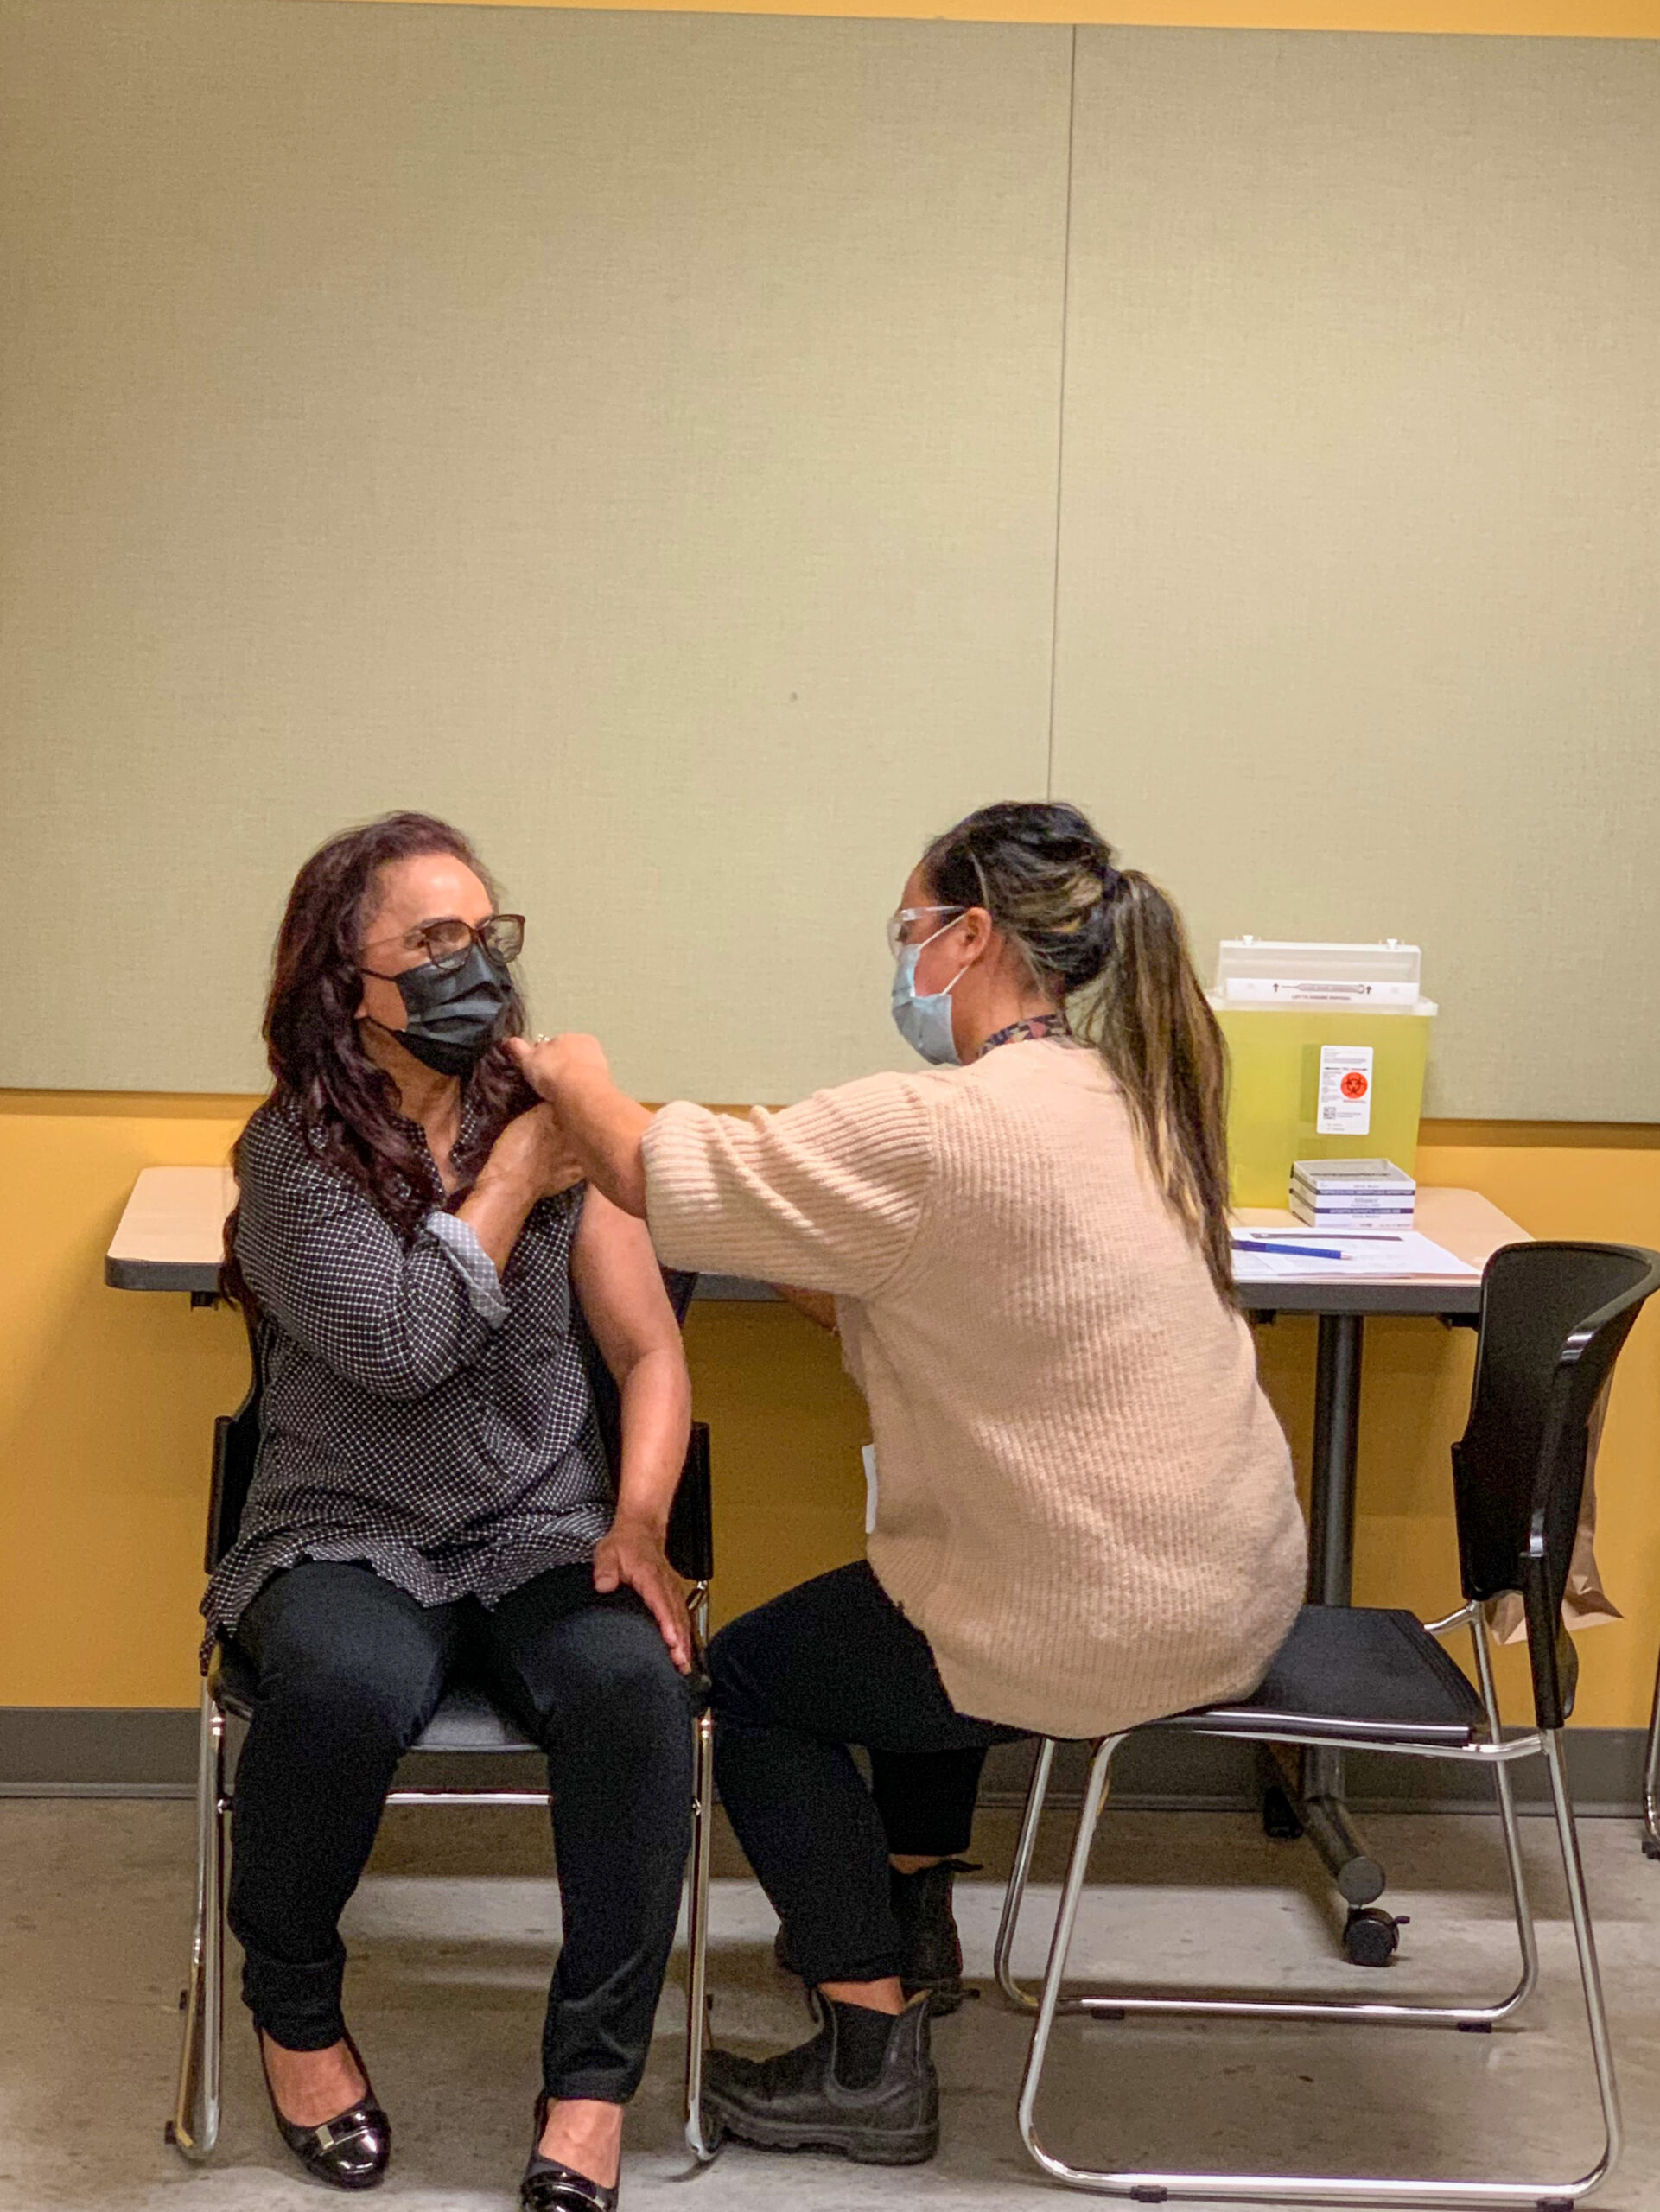 Pictured is Nisha Yunus sitting down on a chair wearing a black face mask as she receives her immunization. The nurse beside her is wearing a non-medical blue face mask as she pokes the needle into Nisha's arm.